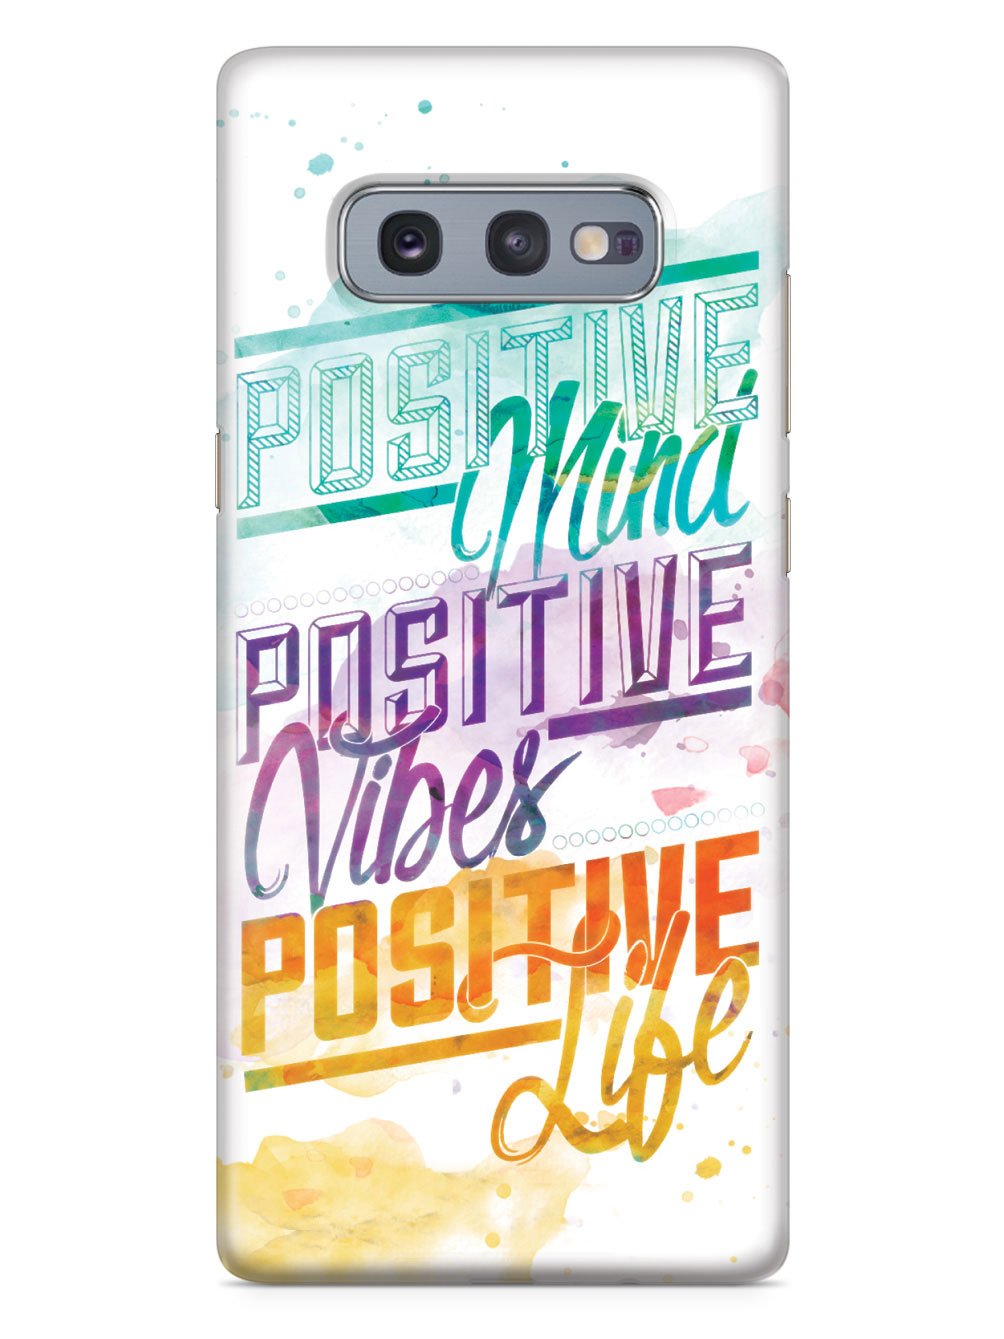 Positive Mind, Positive Vibes, Positive Life - Inspirational Quote Case